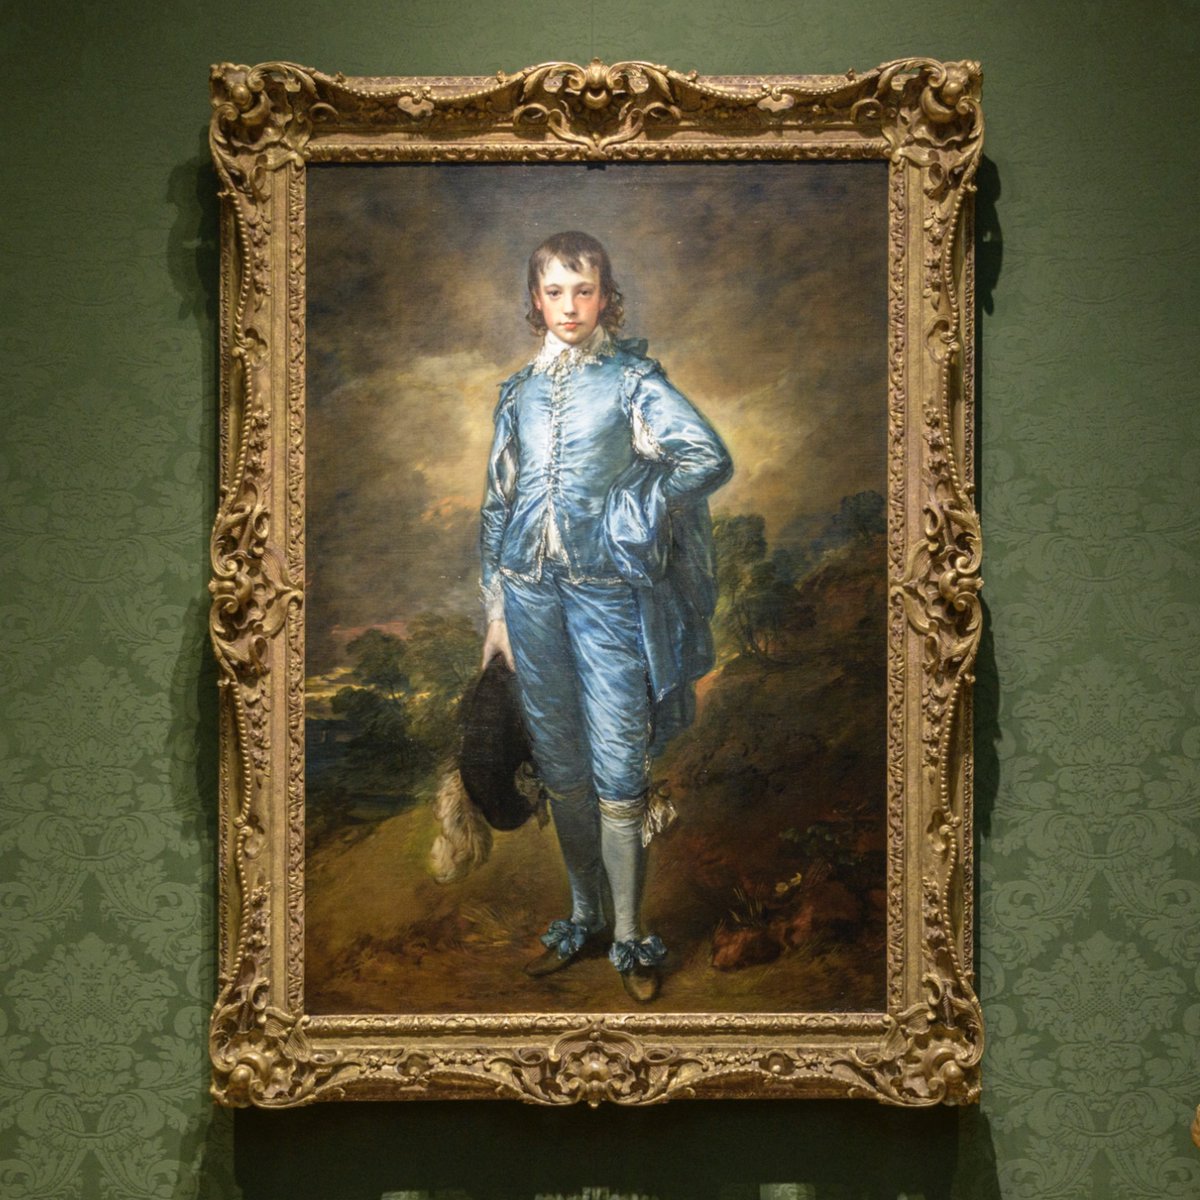 Separated by over 250 years, artists Kehinde Wiley and Thomas Gainsborough are linked by the subjects in their paintings. How do these paintings fit into The Huntington’s collections today? 🔍 Find out in a FREE trilingual Drop-in Talk this Saturday: bit.ly/493tq6Q